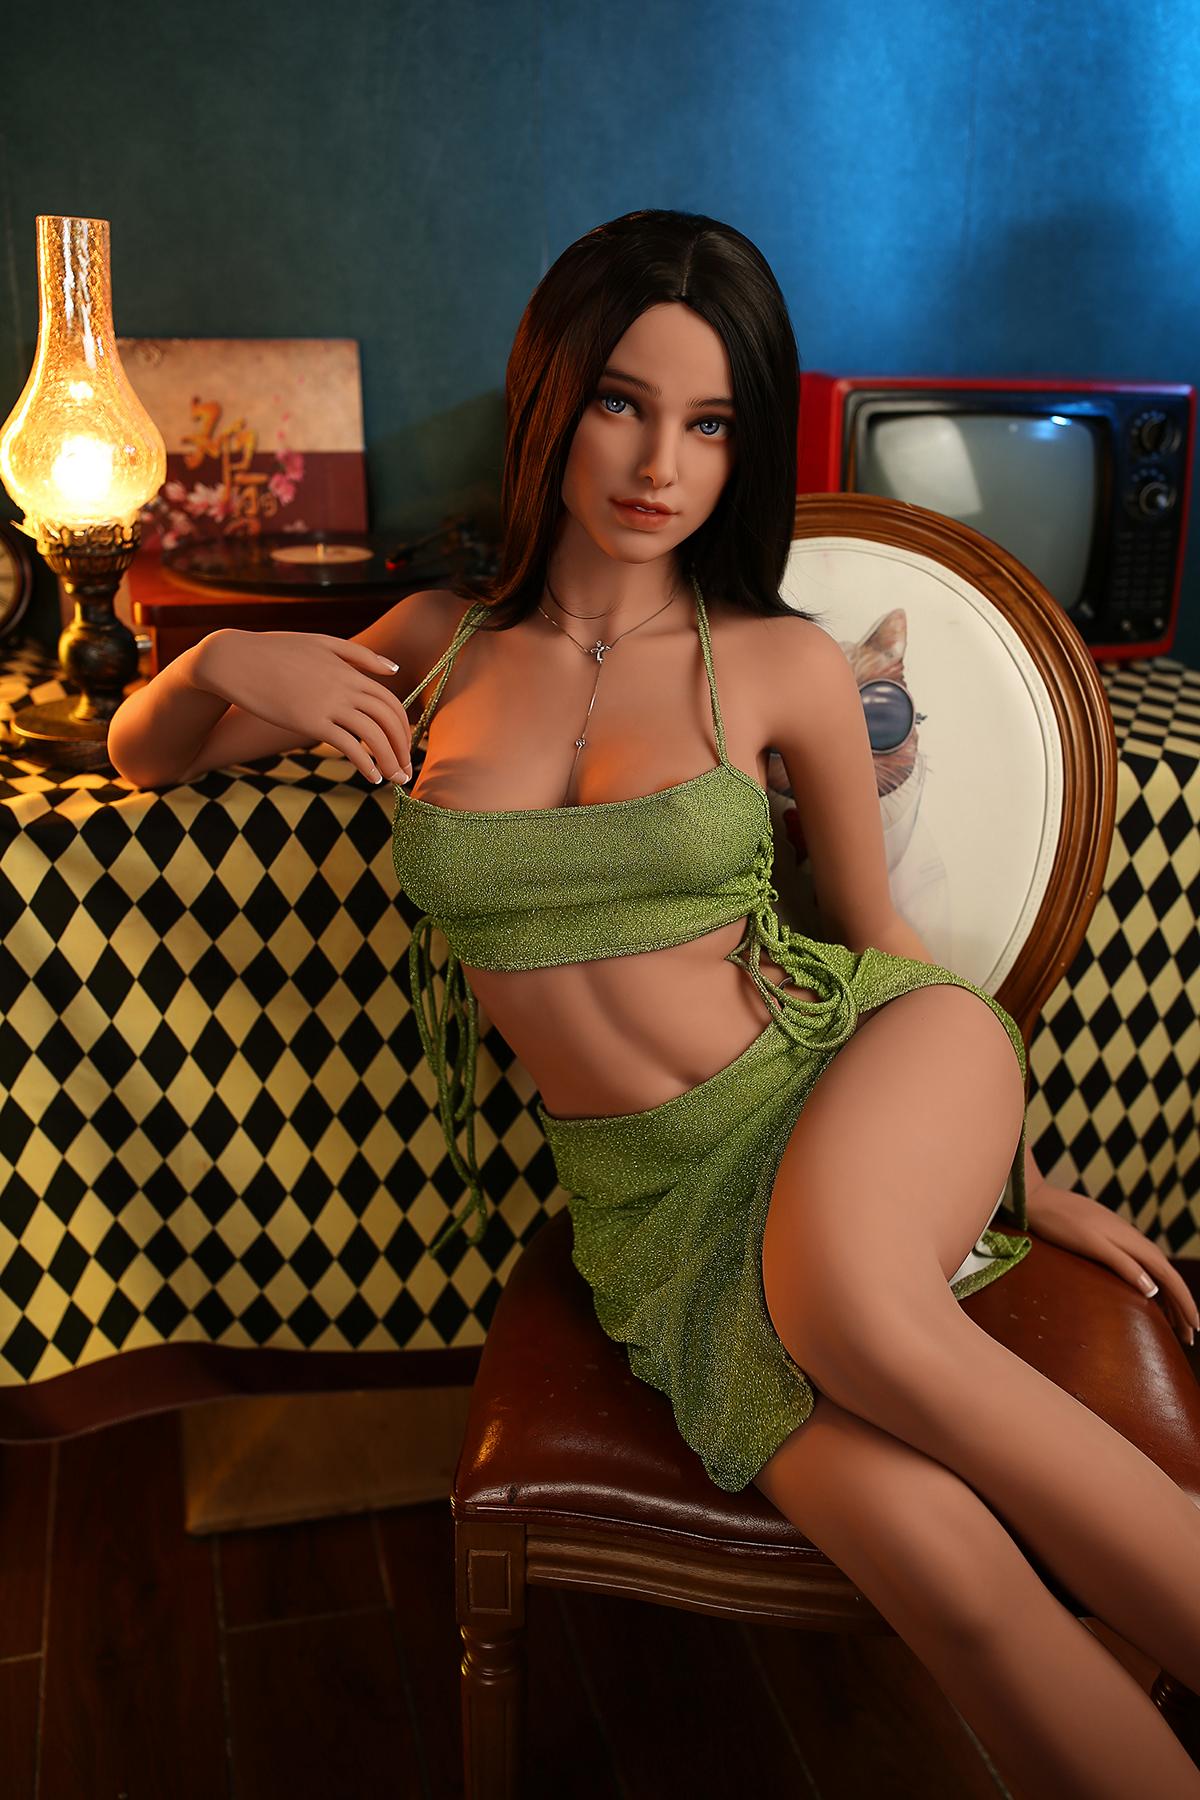 Sex doll Betty as pictured | Perma-Make Up!